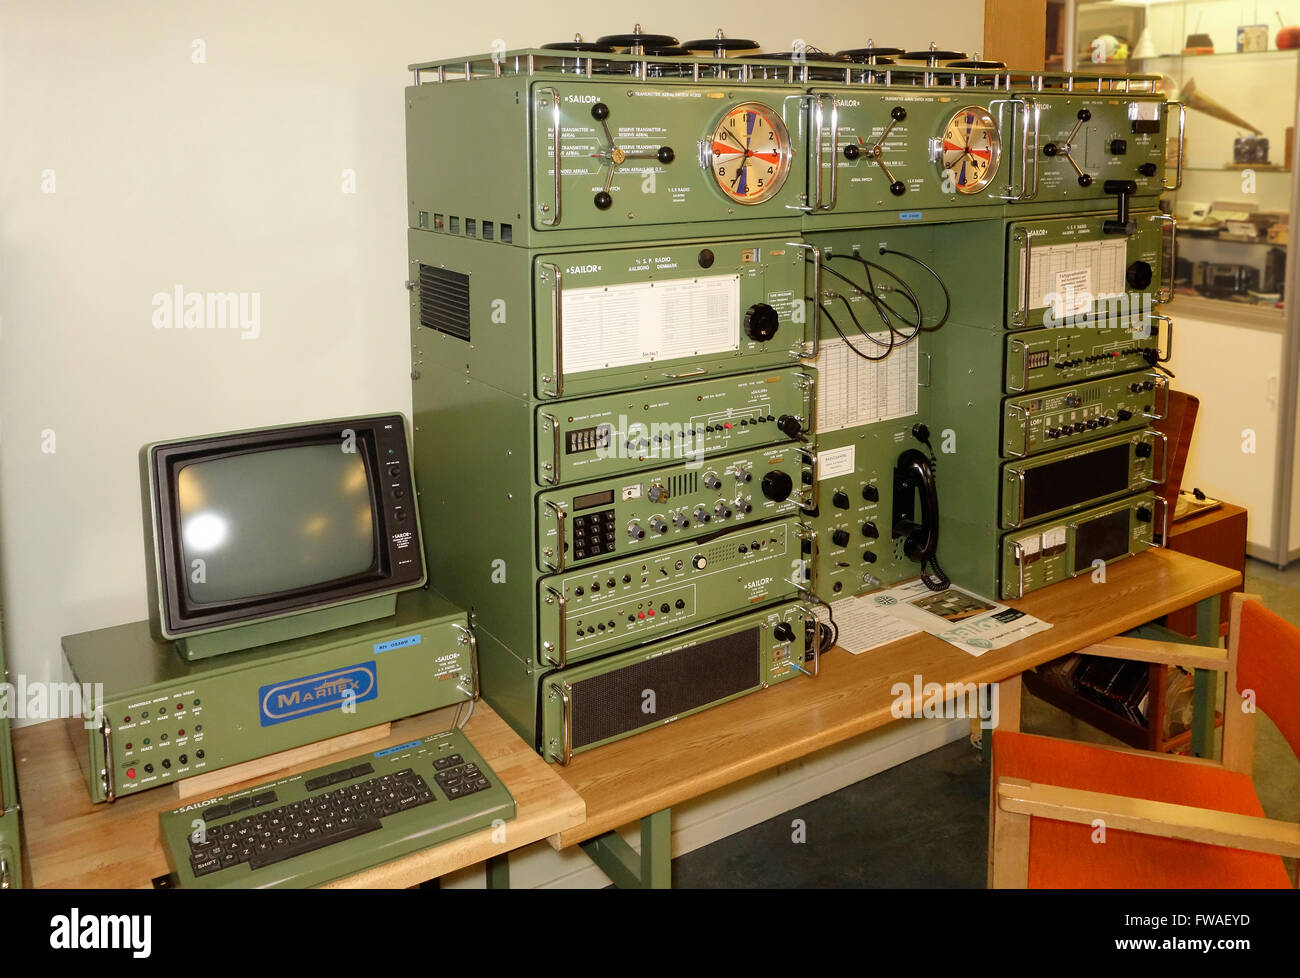 Automatic Radiotelex station Maritex with keyboard and screen and Ships  radio station "SAILOR" from 1980 made by S.P. Radio, Abb Stock Photo - Alamy